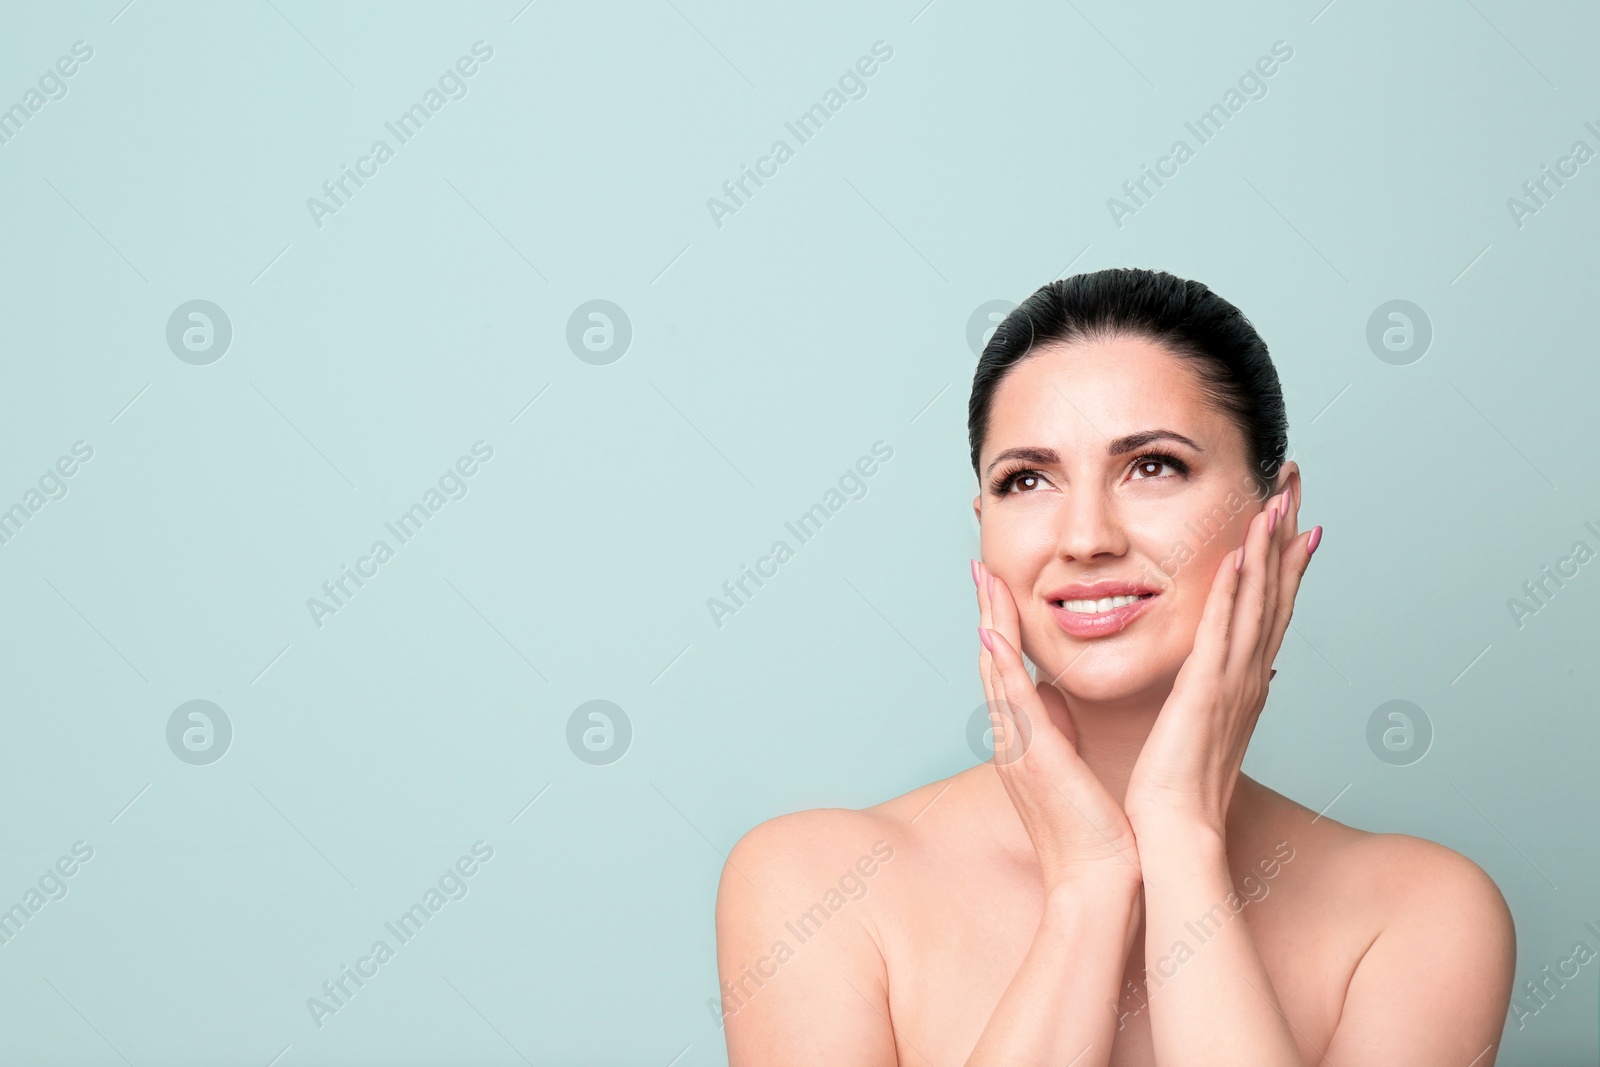 Photo of Beautiful woman with clean skin touching her face on color background